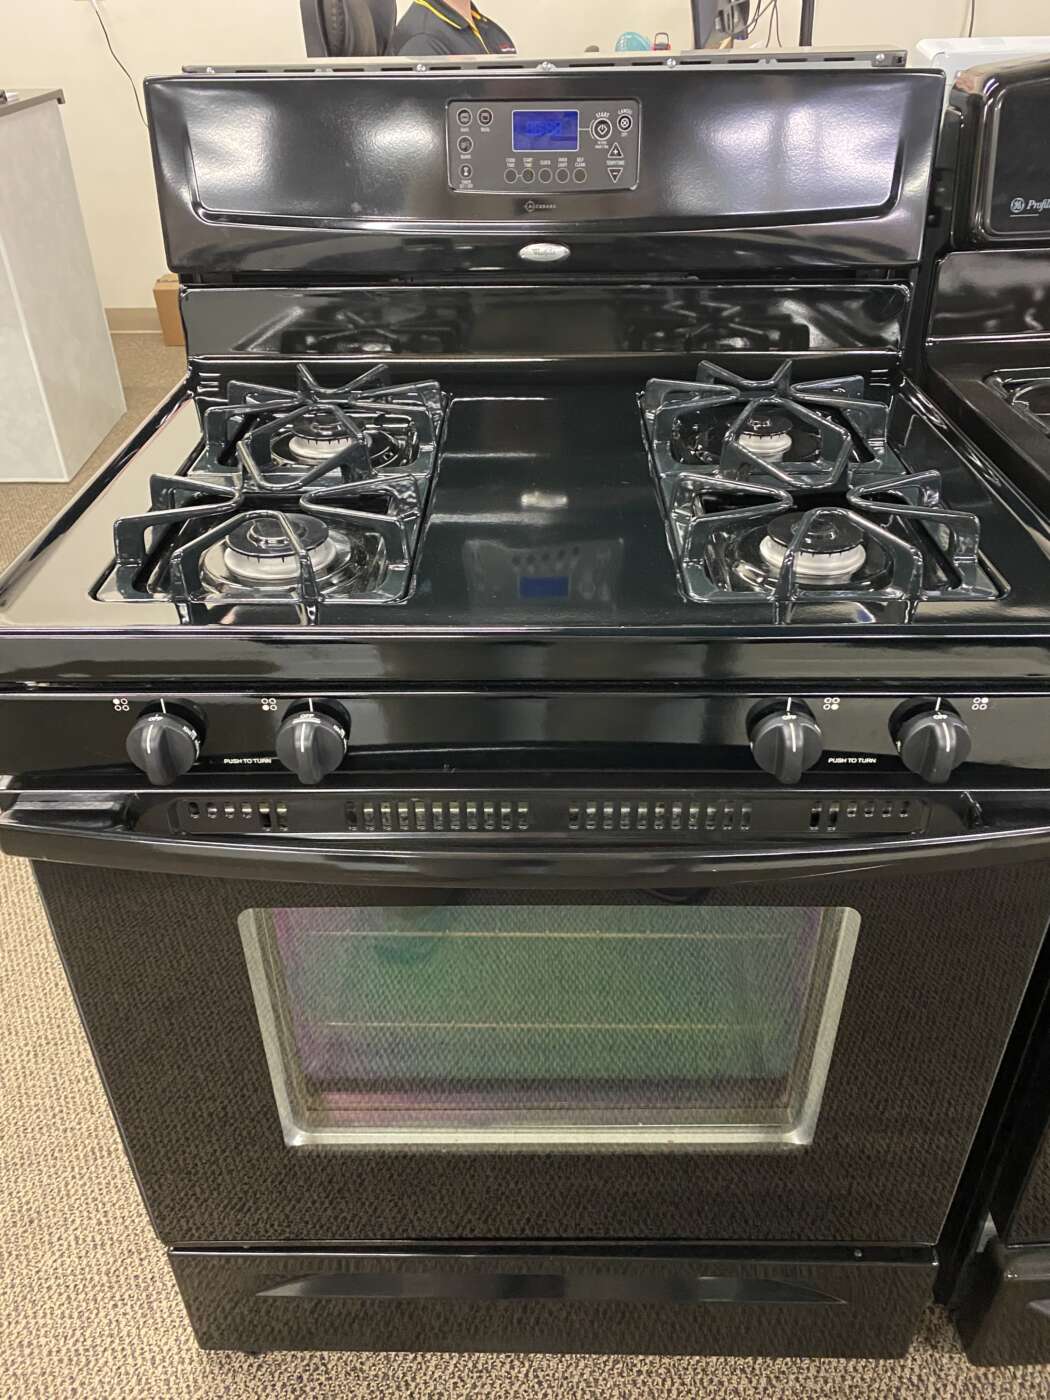 Reconditioned WHIRLPOOL Self-Clean Oven GAS Range – Black